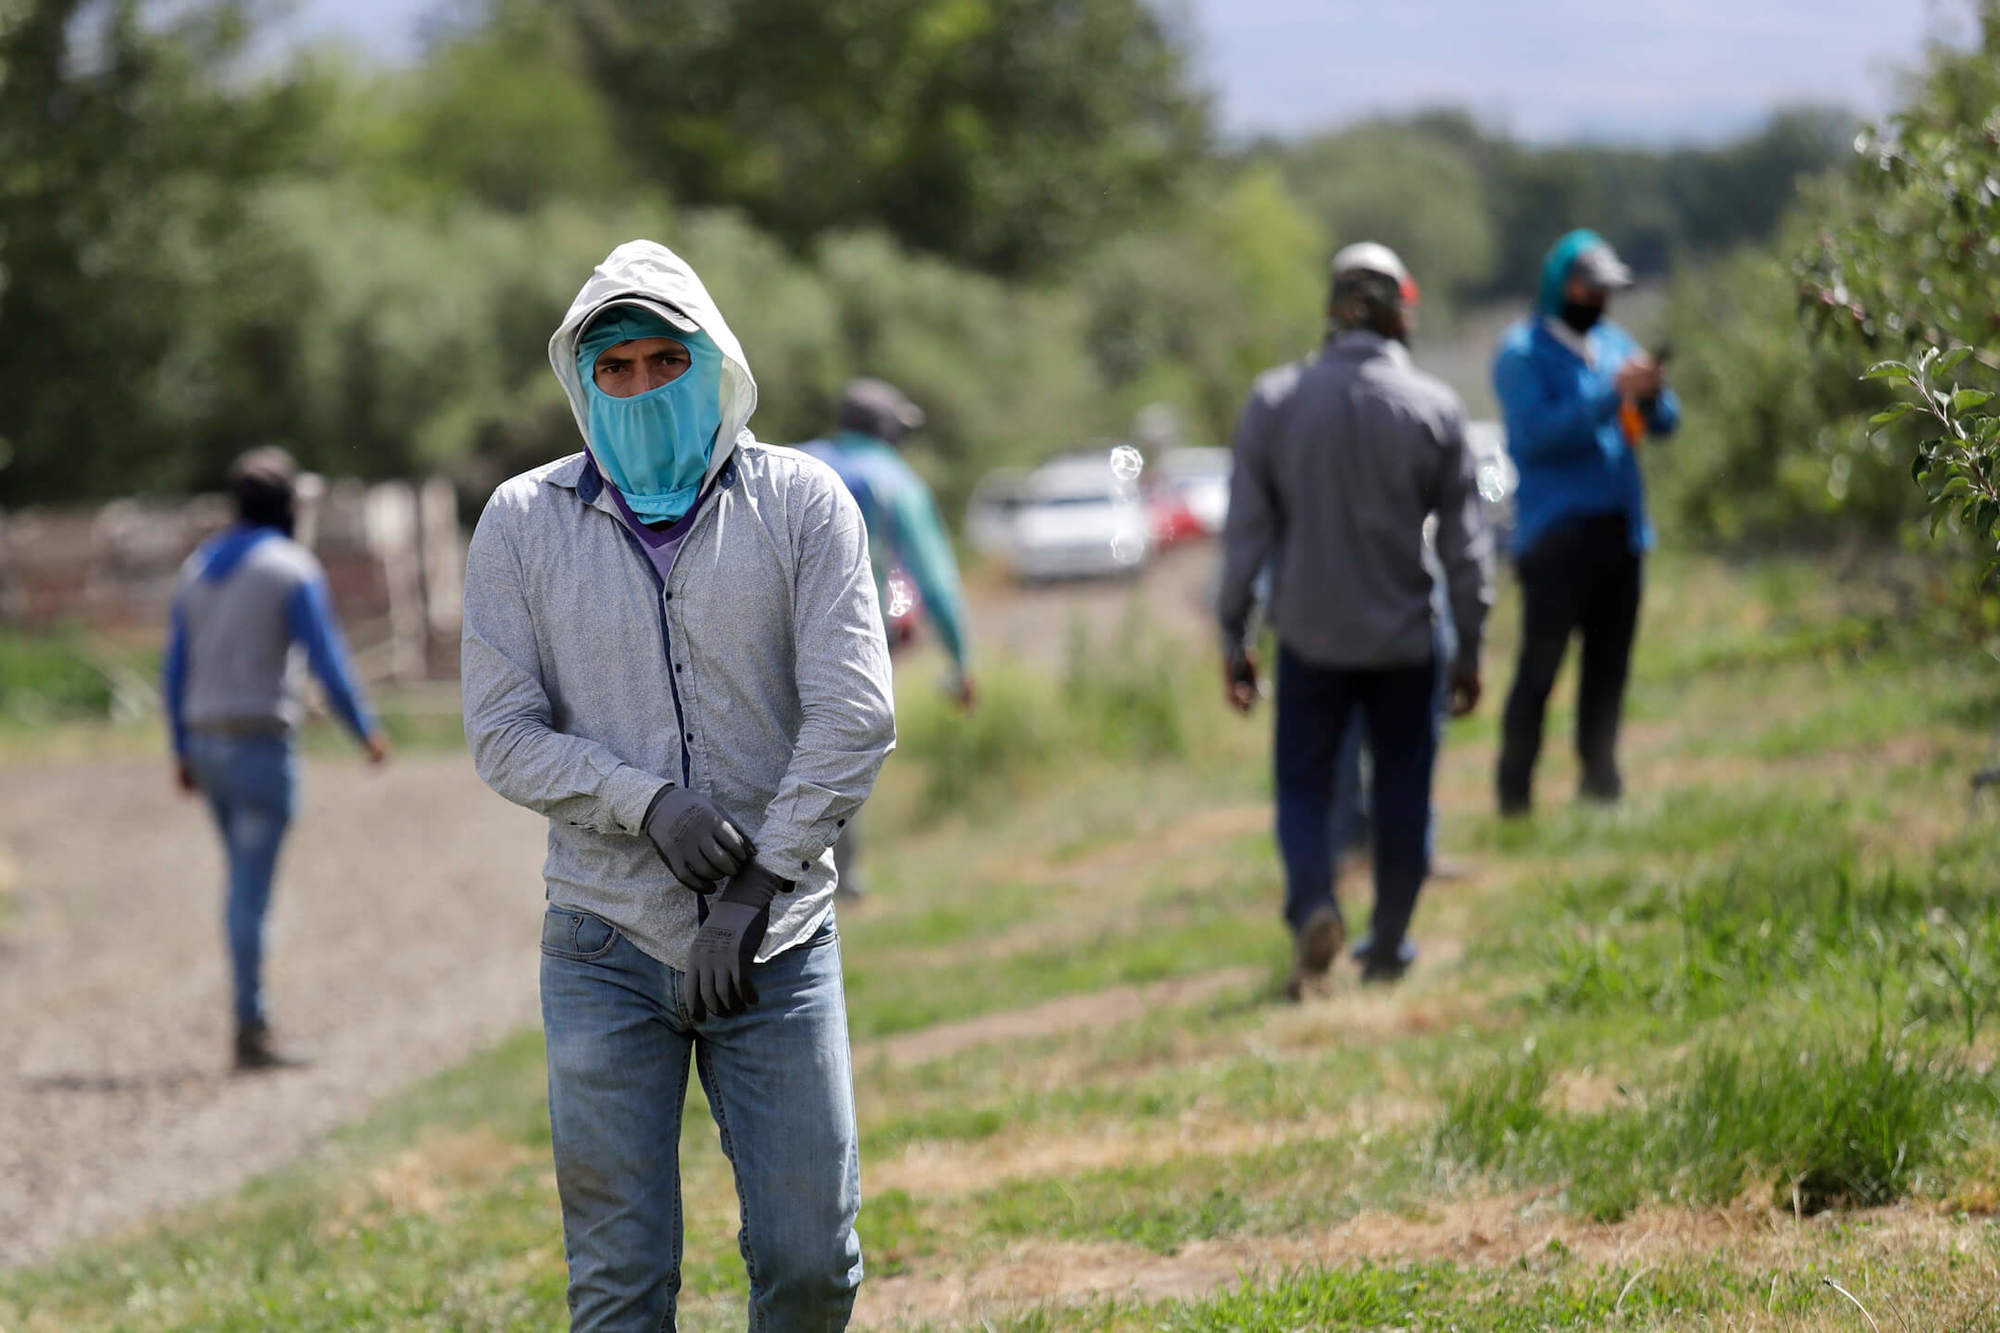 A farmworker with PPE in an Apple Orchard in Washington. September 2020